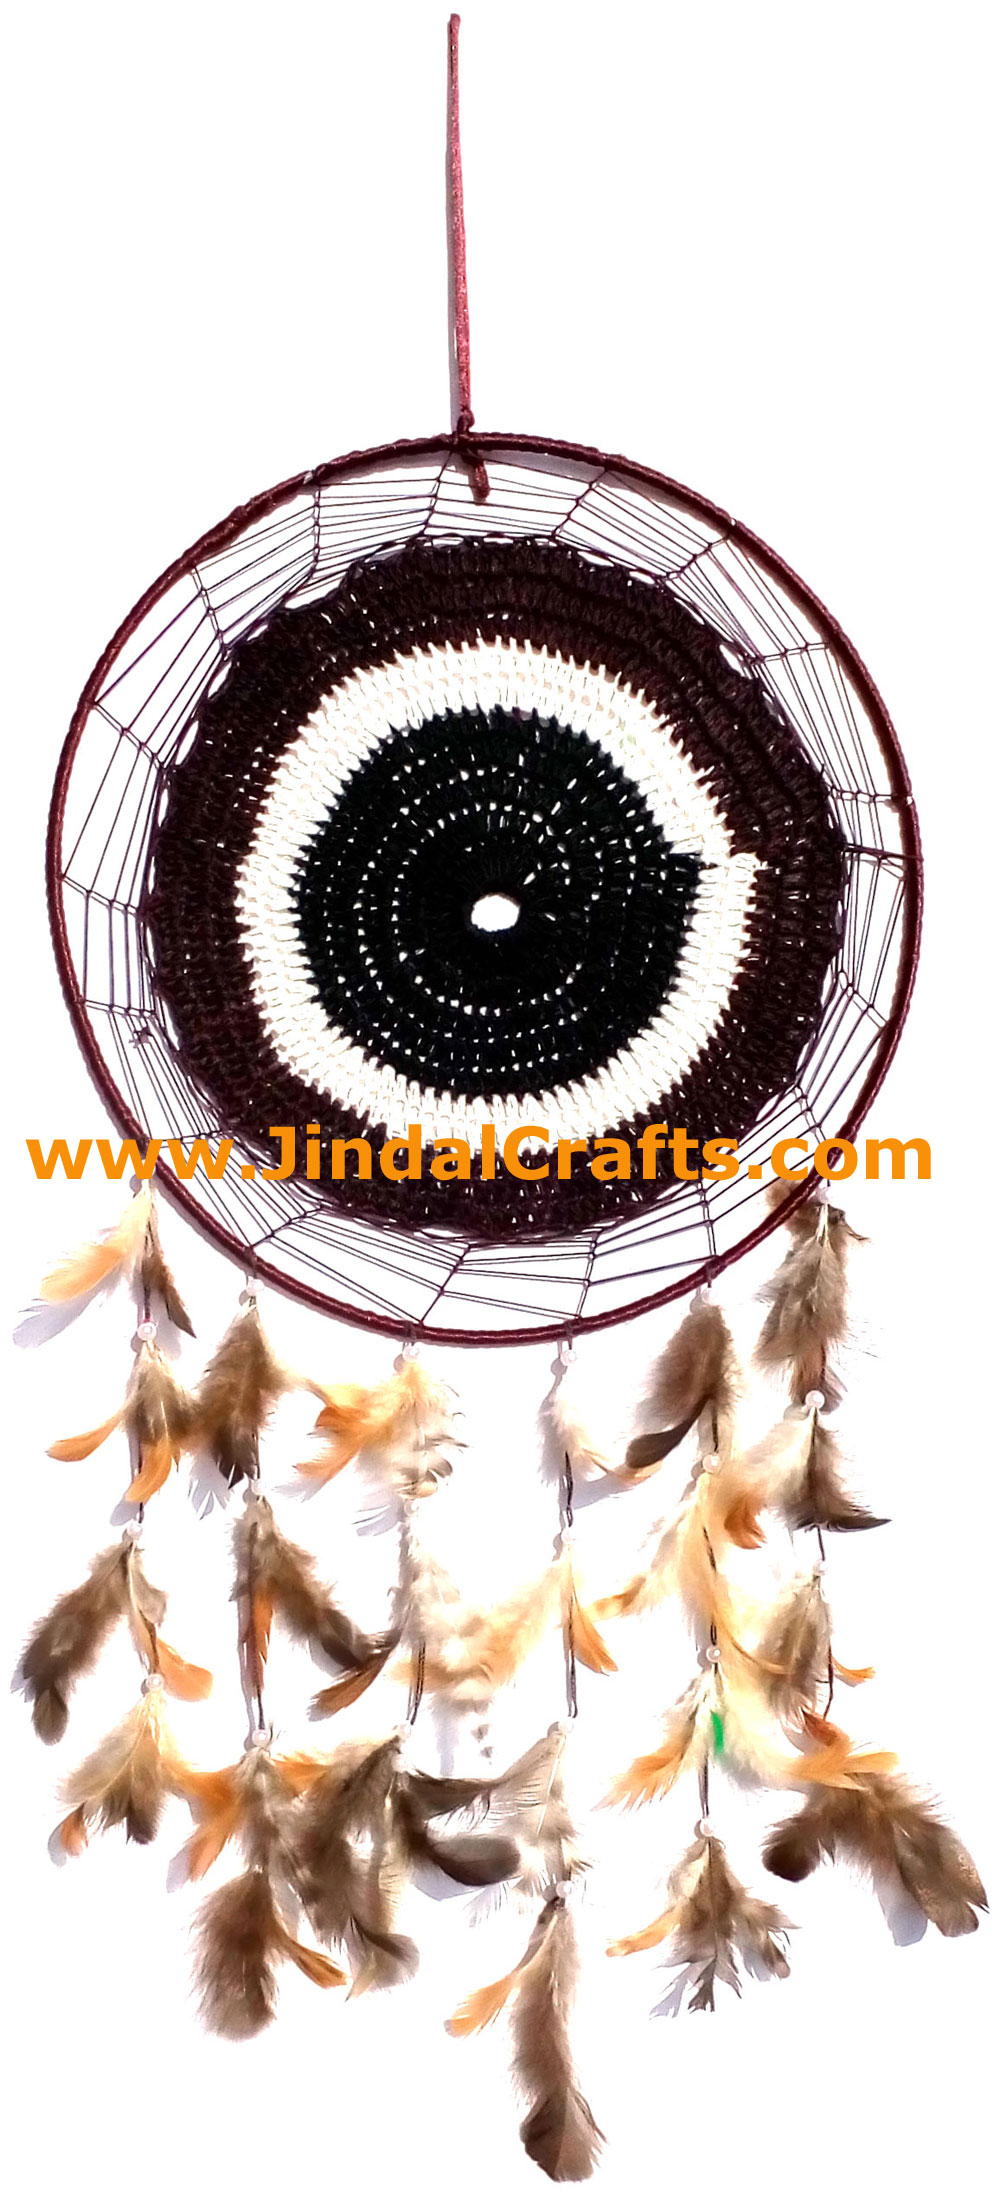 Dreamcatcher to filter bad dreams and good dreams